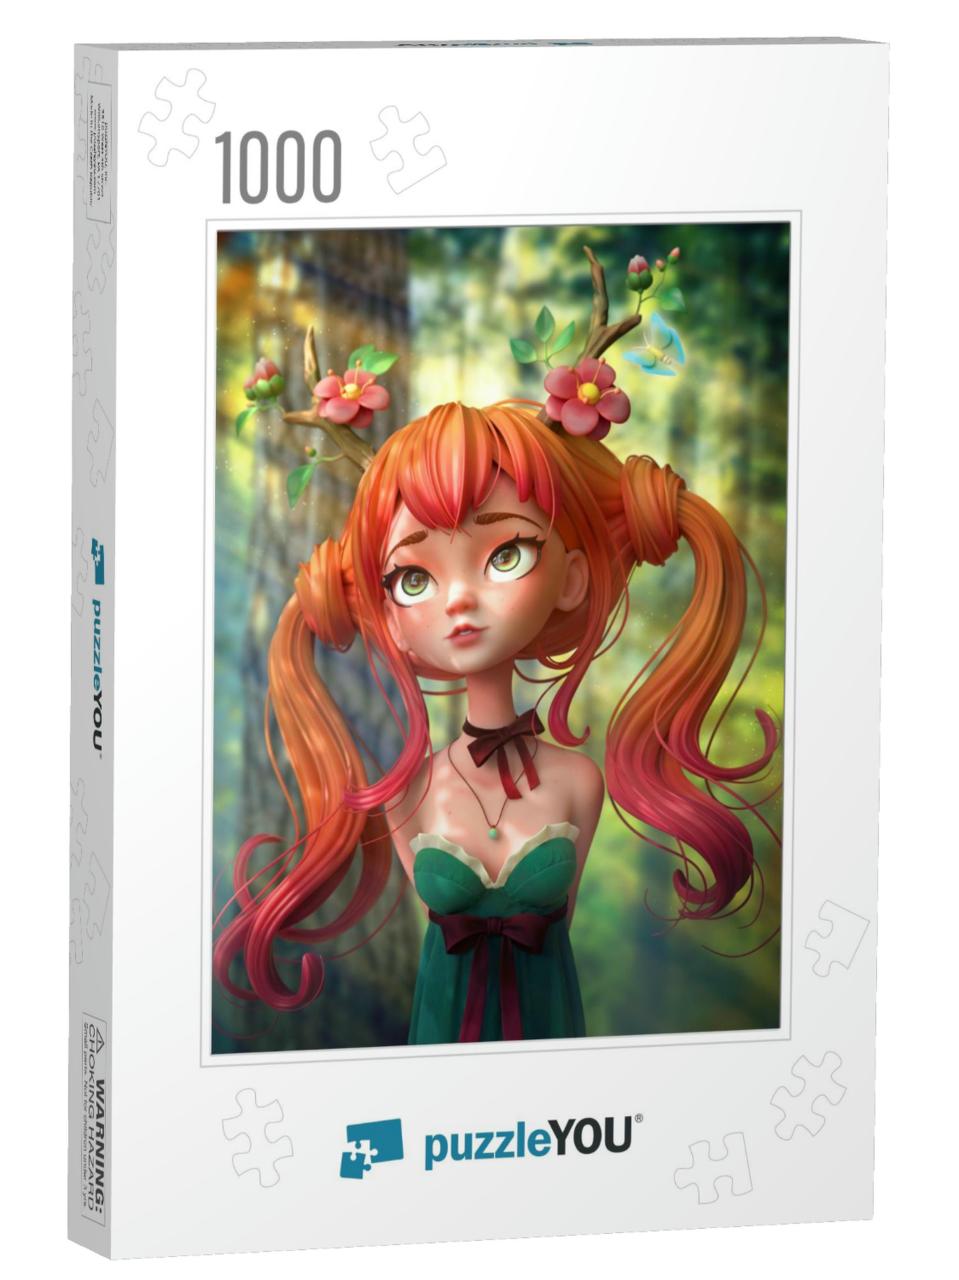 3D Cartoon Character Red-Haired Girl in a Green Dress wit... Jigsaw Puzzle with 1000 pieces